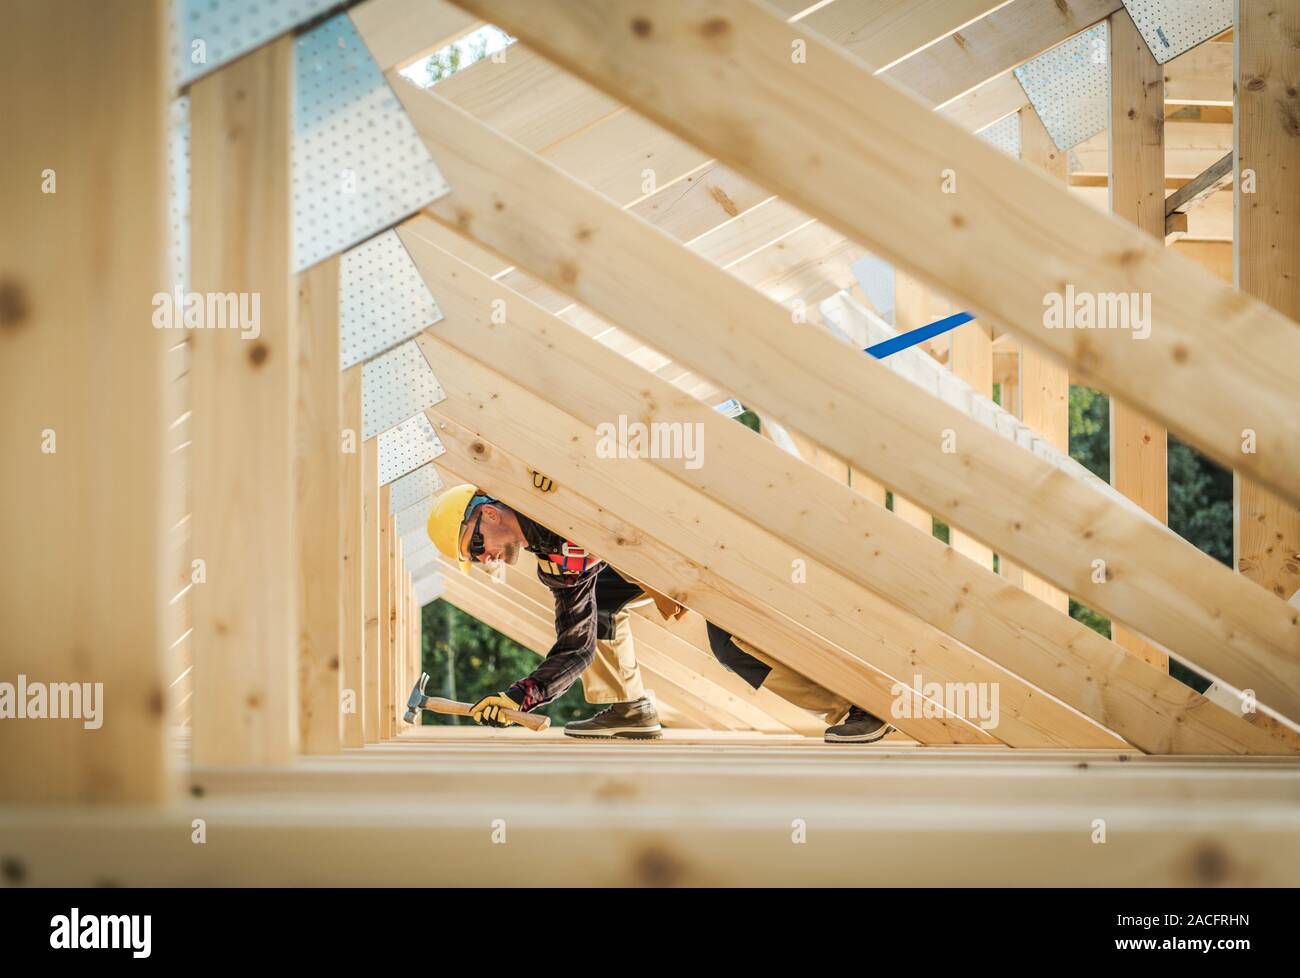 Wooden Home Frame Construction. Caucasian Contractor in His 30s Wearing Hard Hat. Residential Construction. Stock Photo